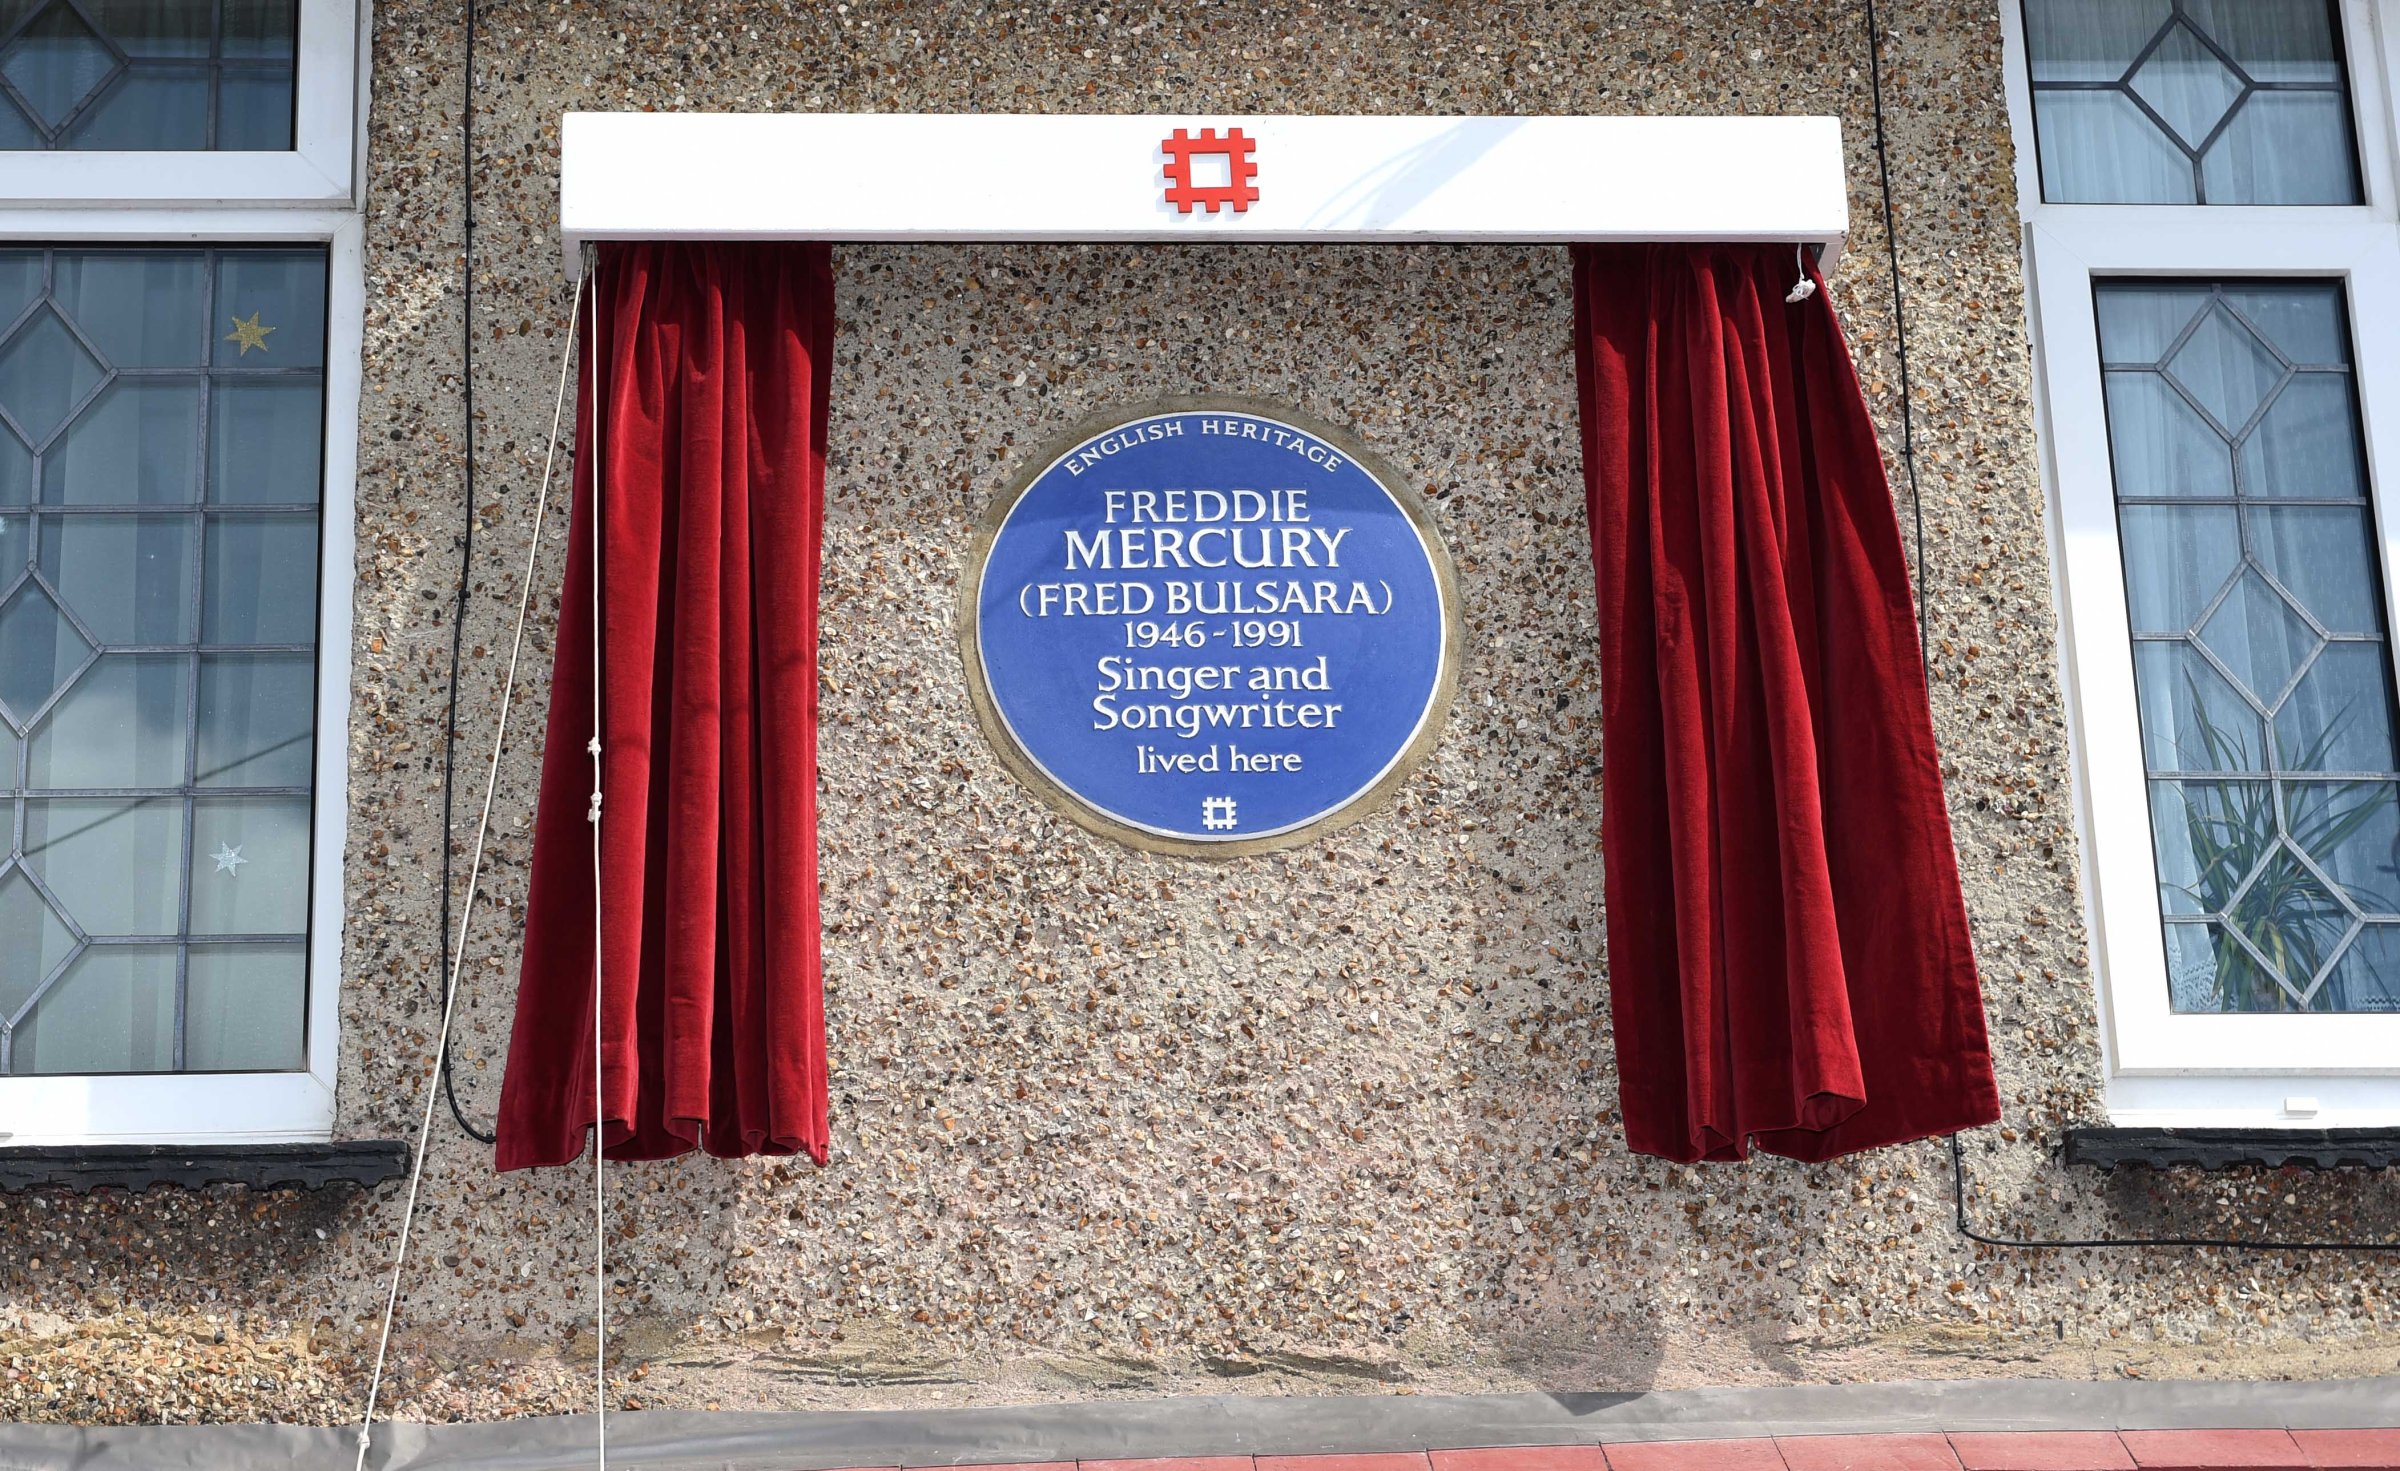 The unveiling of an English Heritage Blue Plaque, commemorating where Freddie Mercury lived in Feltham, England, on Sept. 1, 2016.